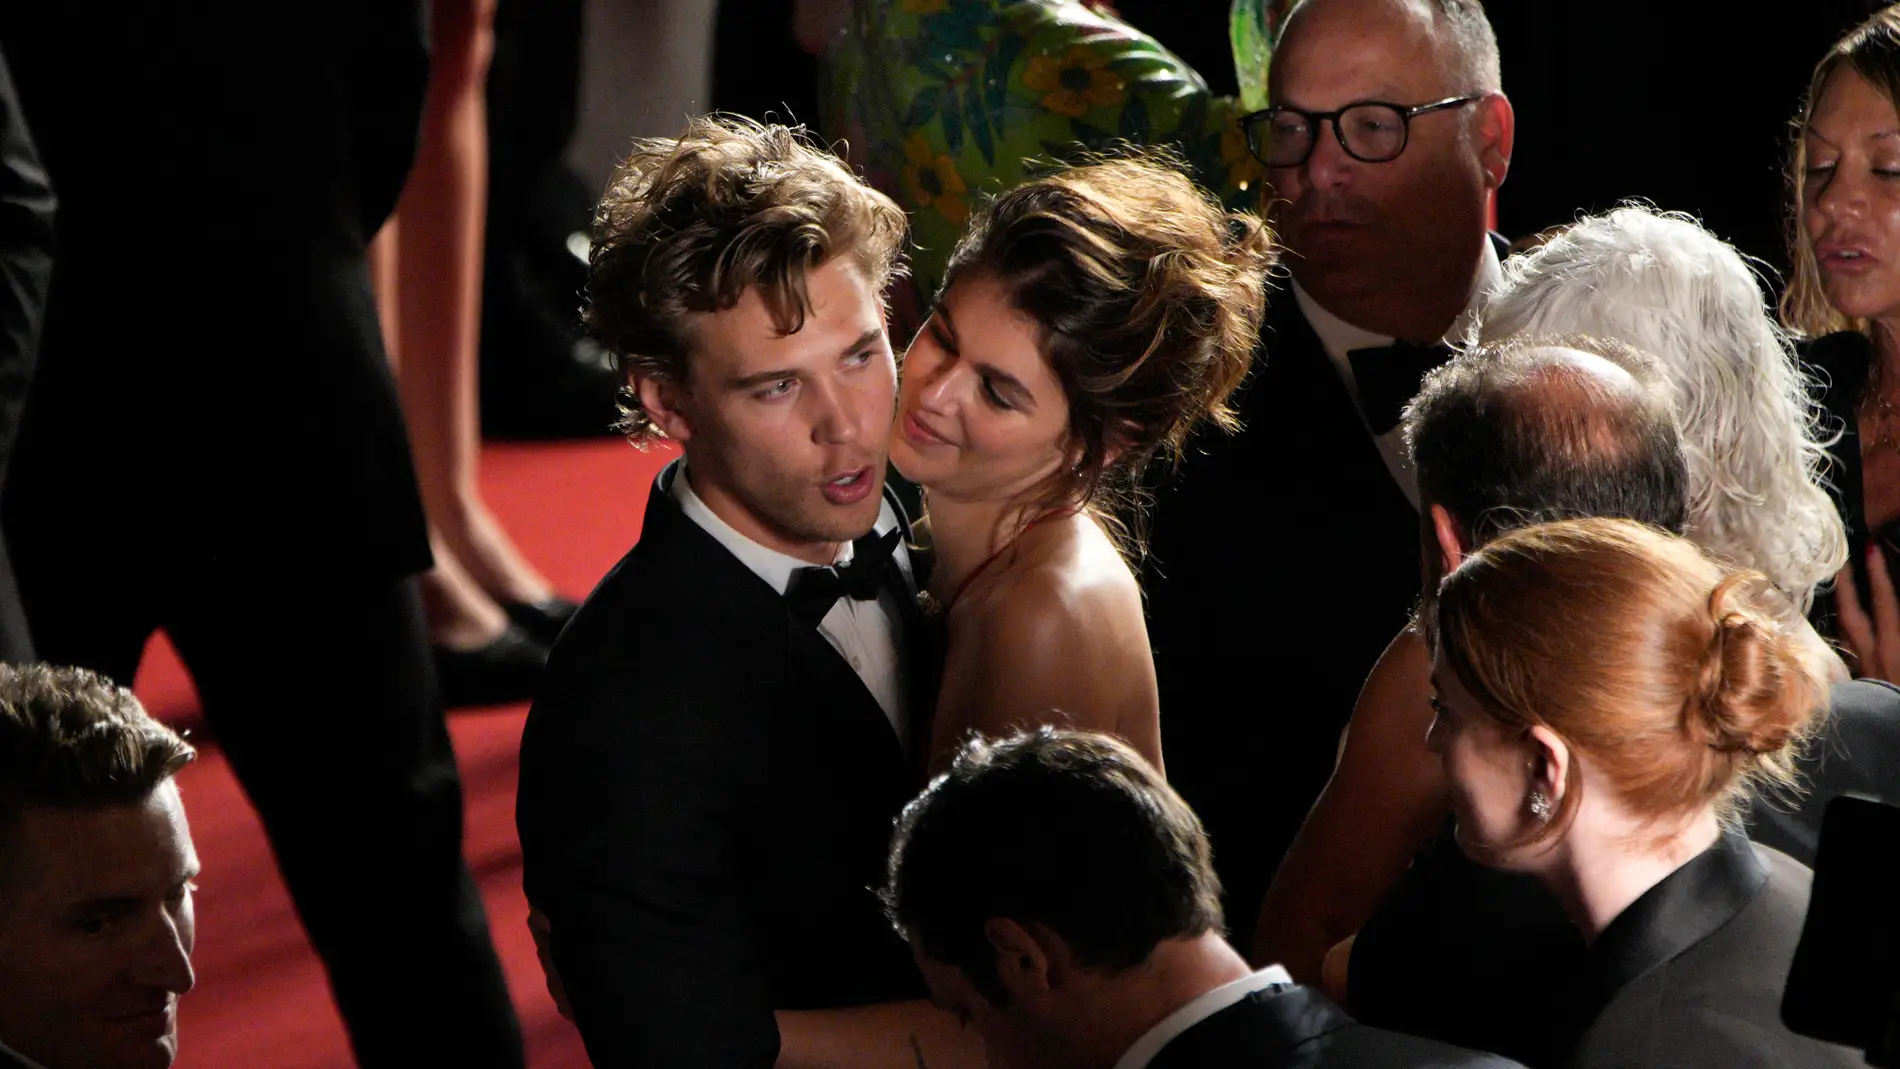 Austin Butler and Kaia Gerber, on the red carpet at Cannes in May 2022